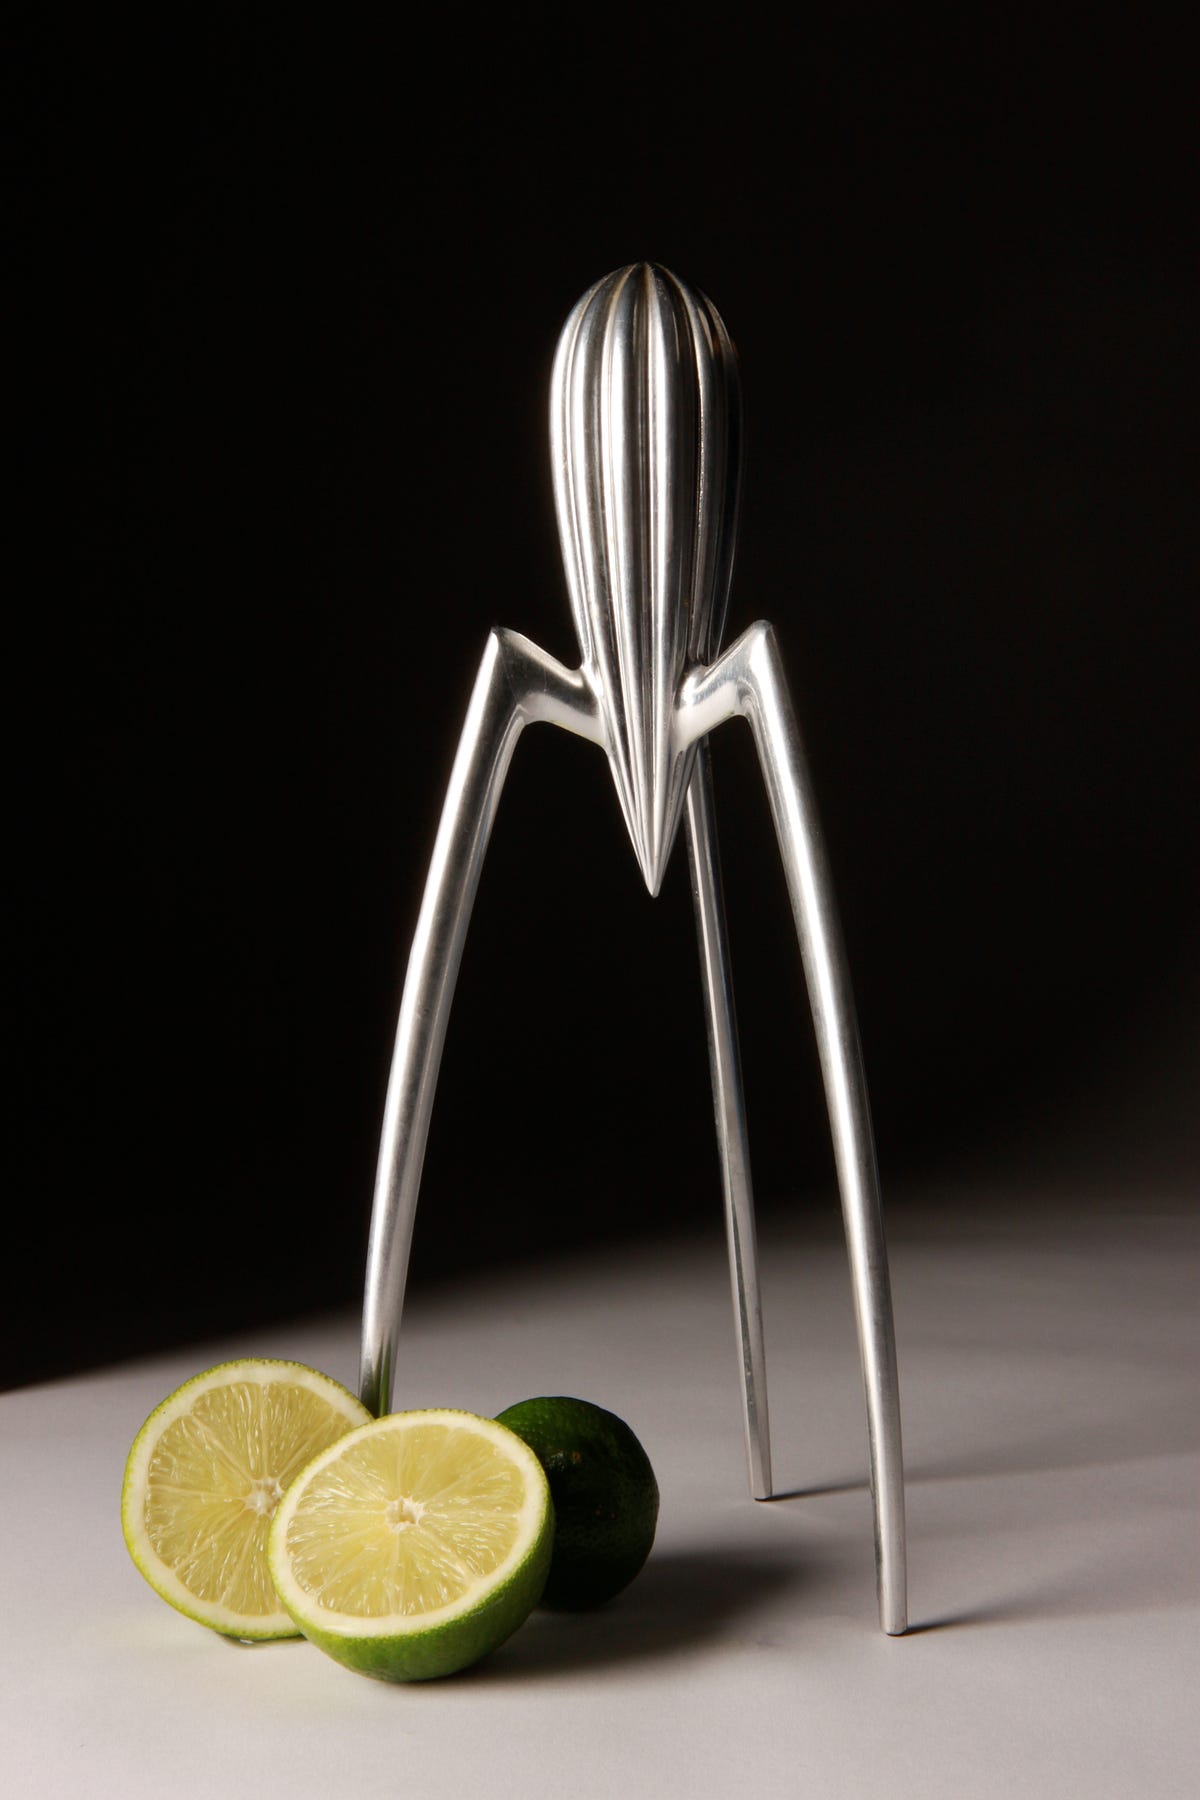 Philippe Starck's lemon squeezer. Philippe Starck was having lunch on the…  | by xano | Medium